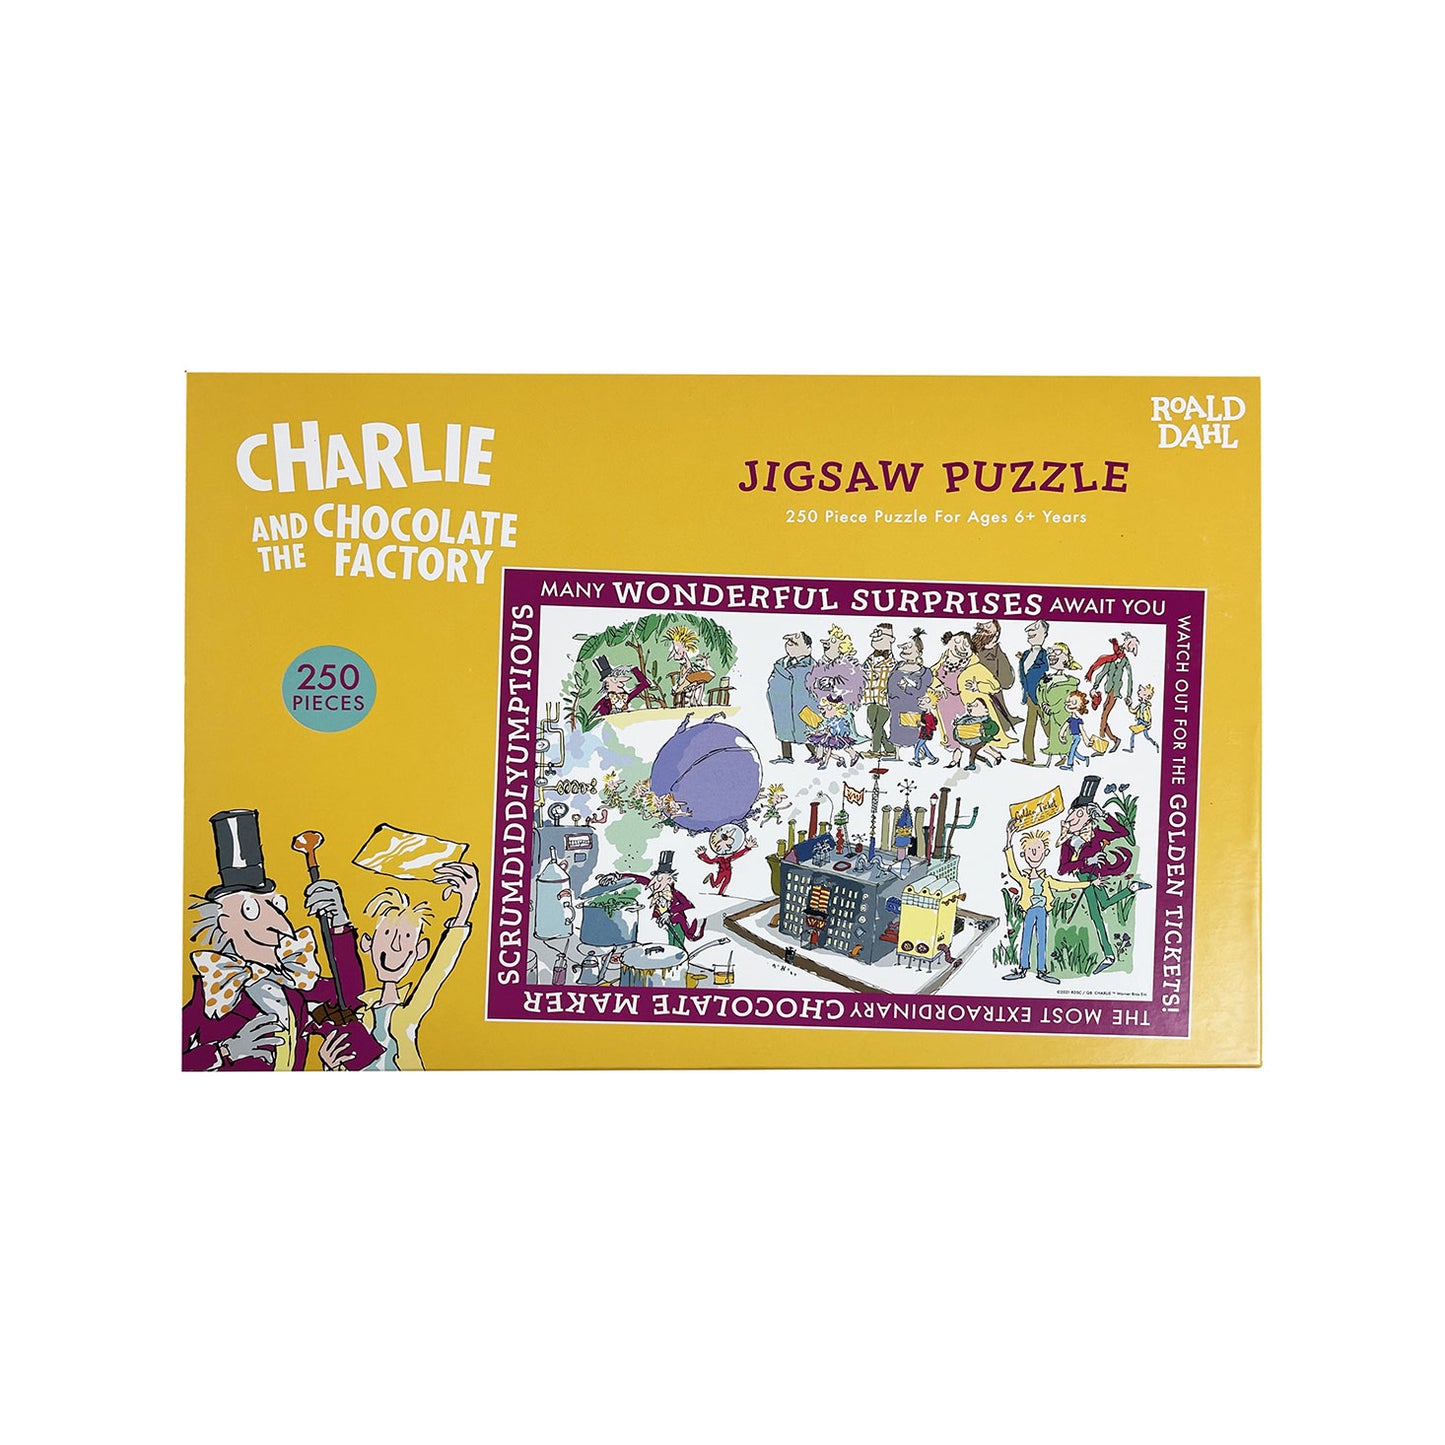 Charlie and the Chocolate Factory Jigsaw Puzzle based on Roald Dahl with illustrations by Quentin Blake